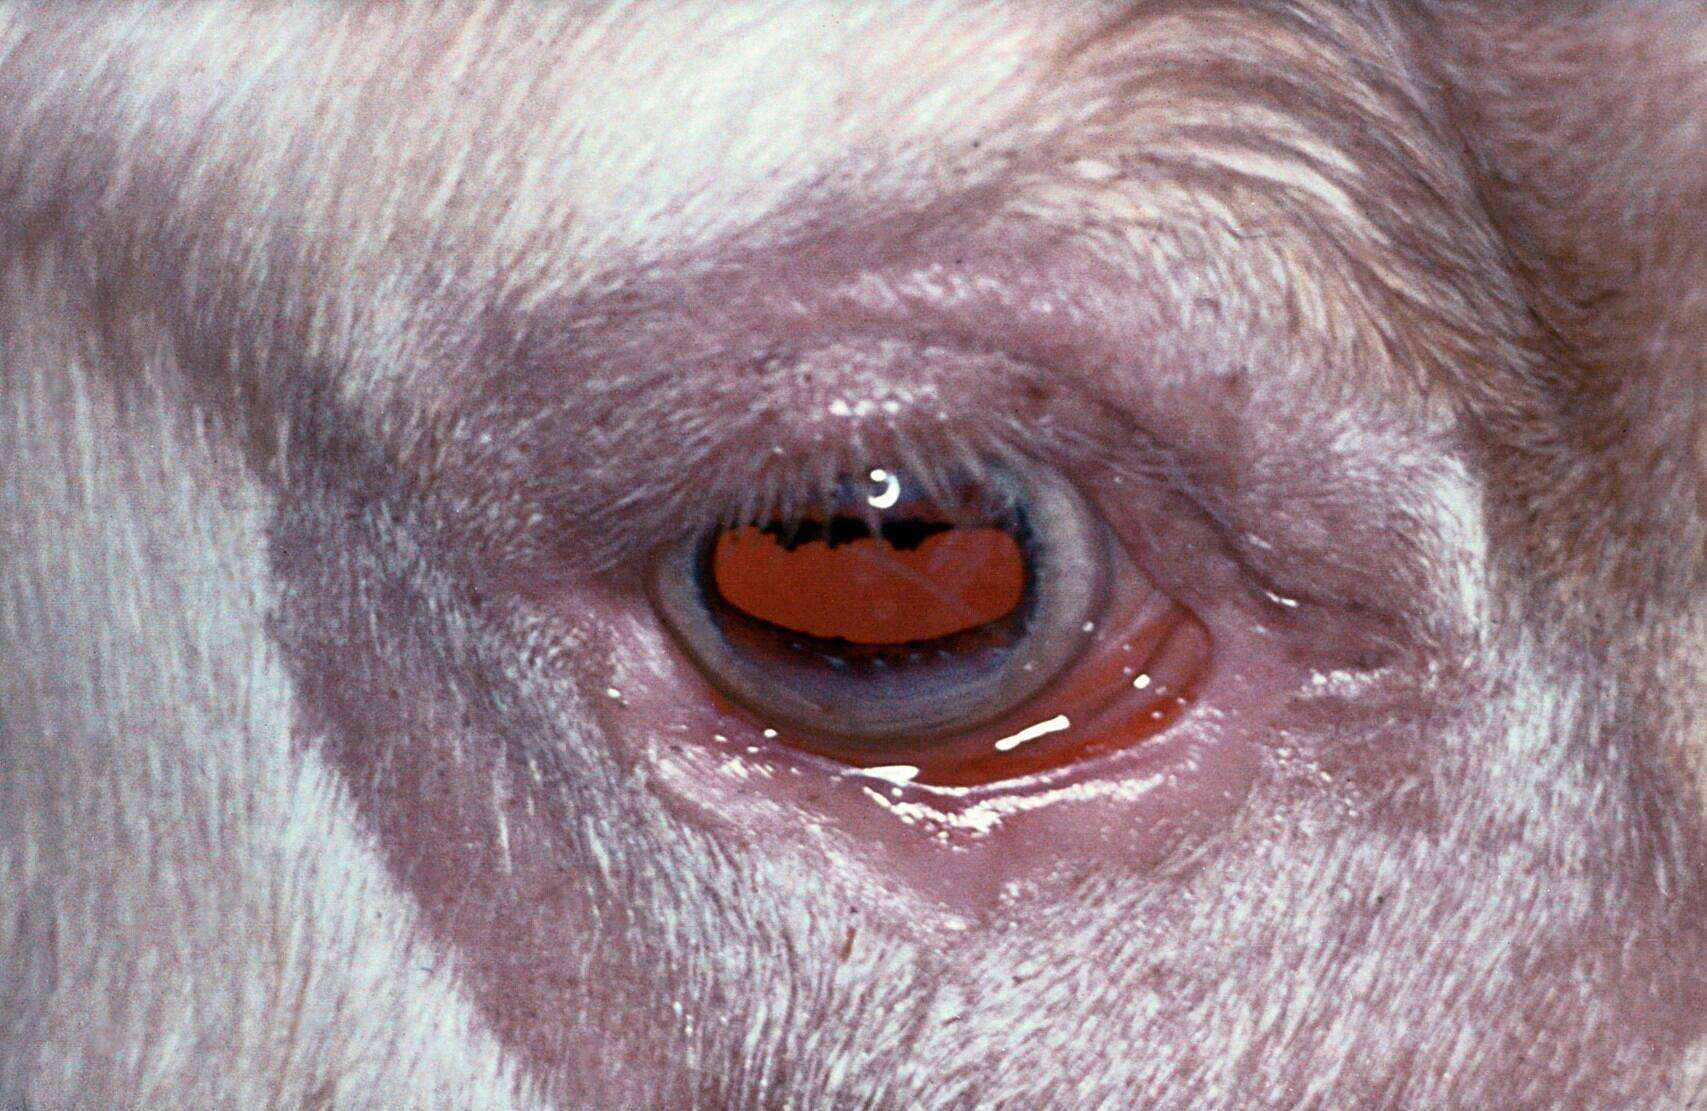 Cow: squamous cell carcinoma